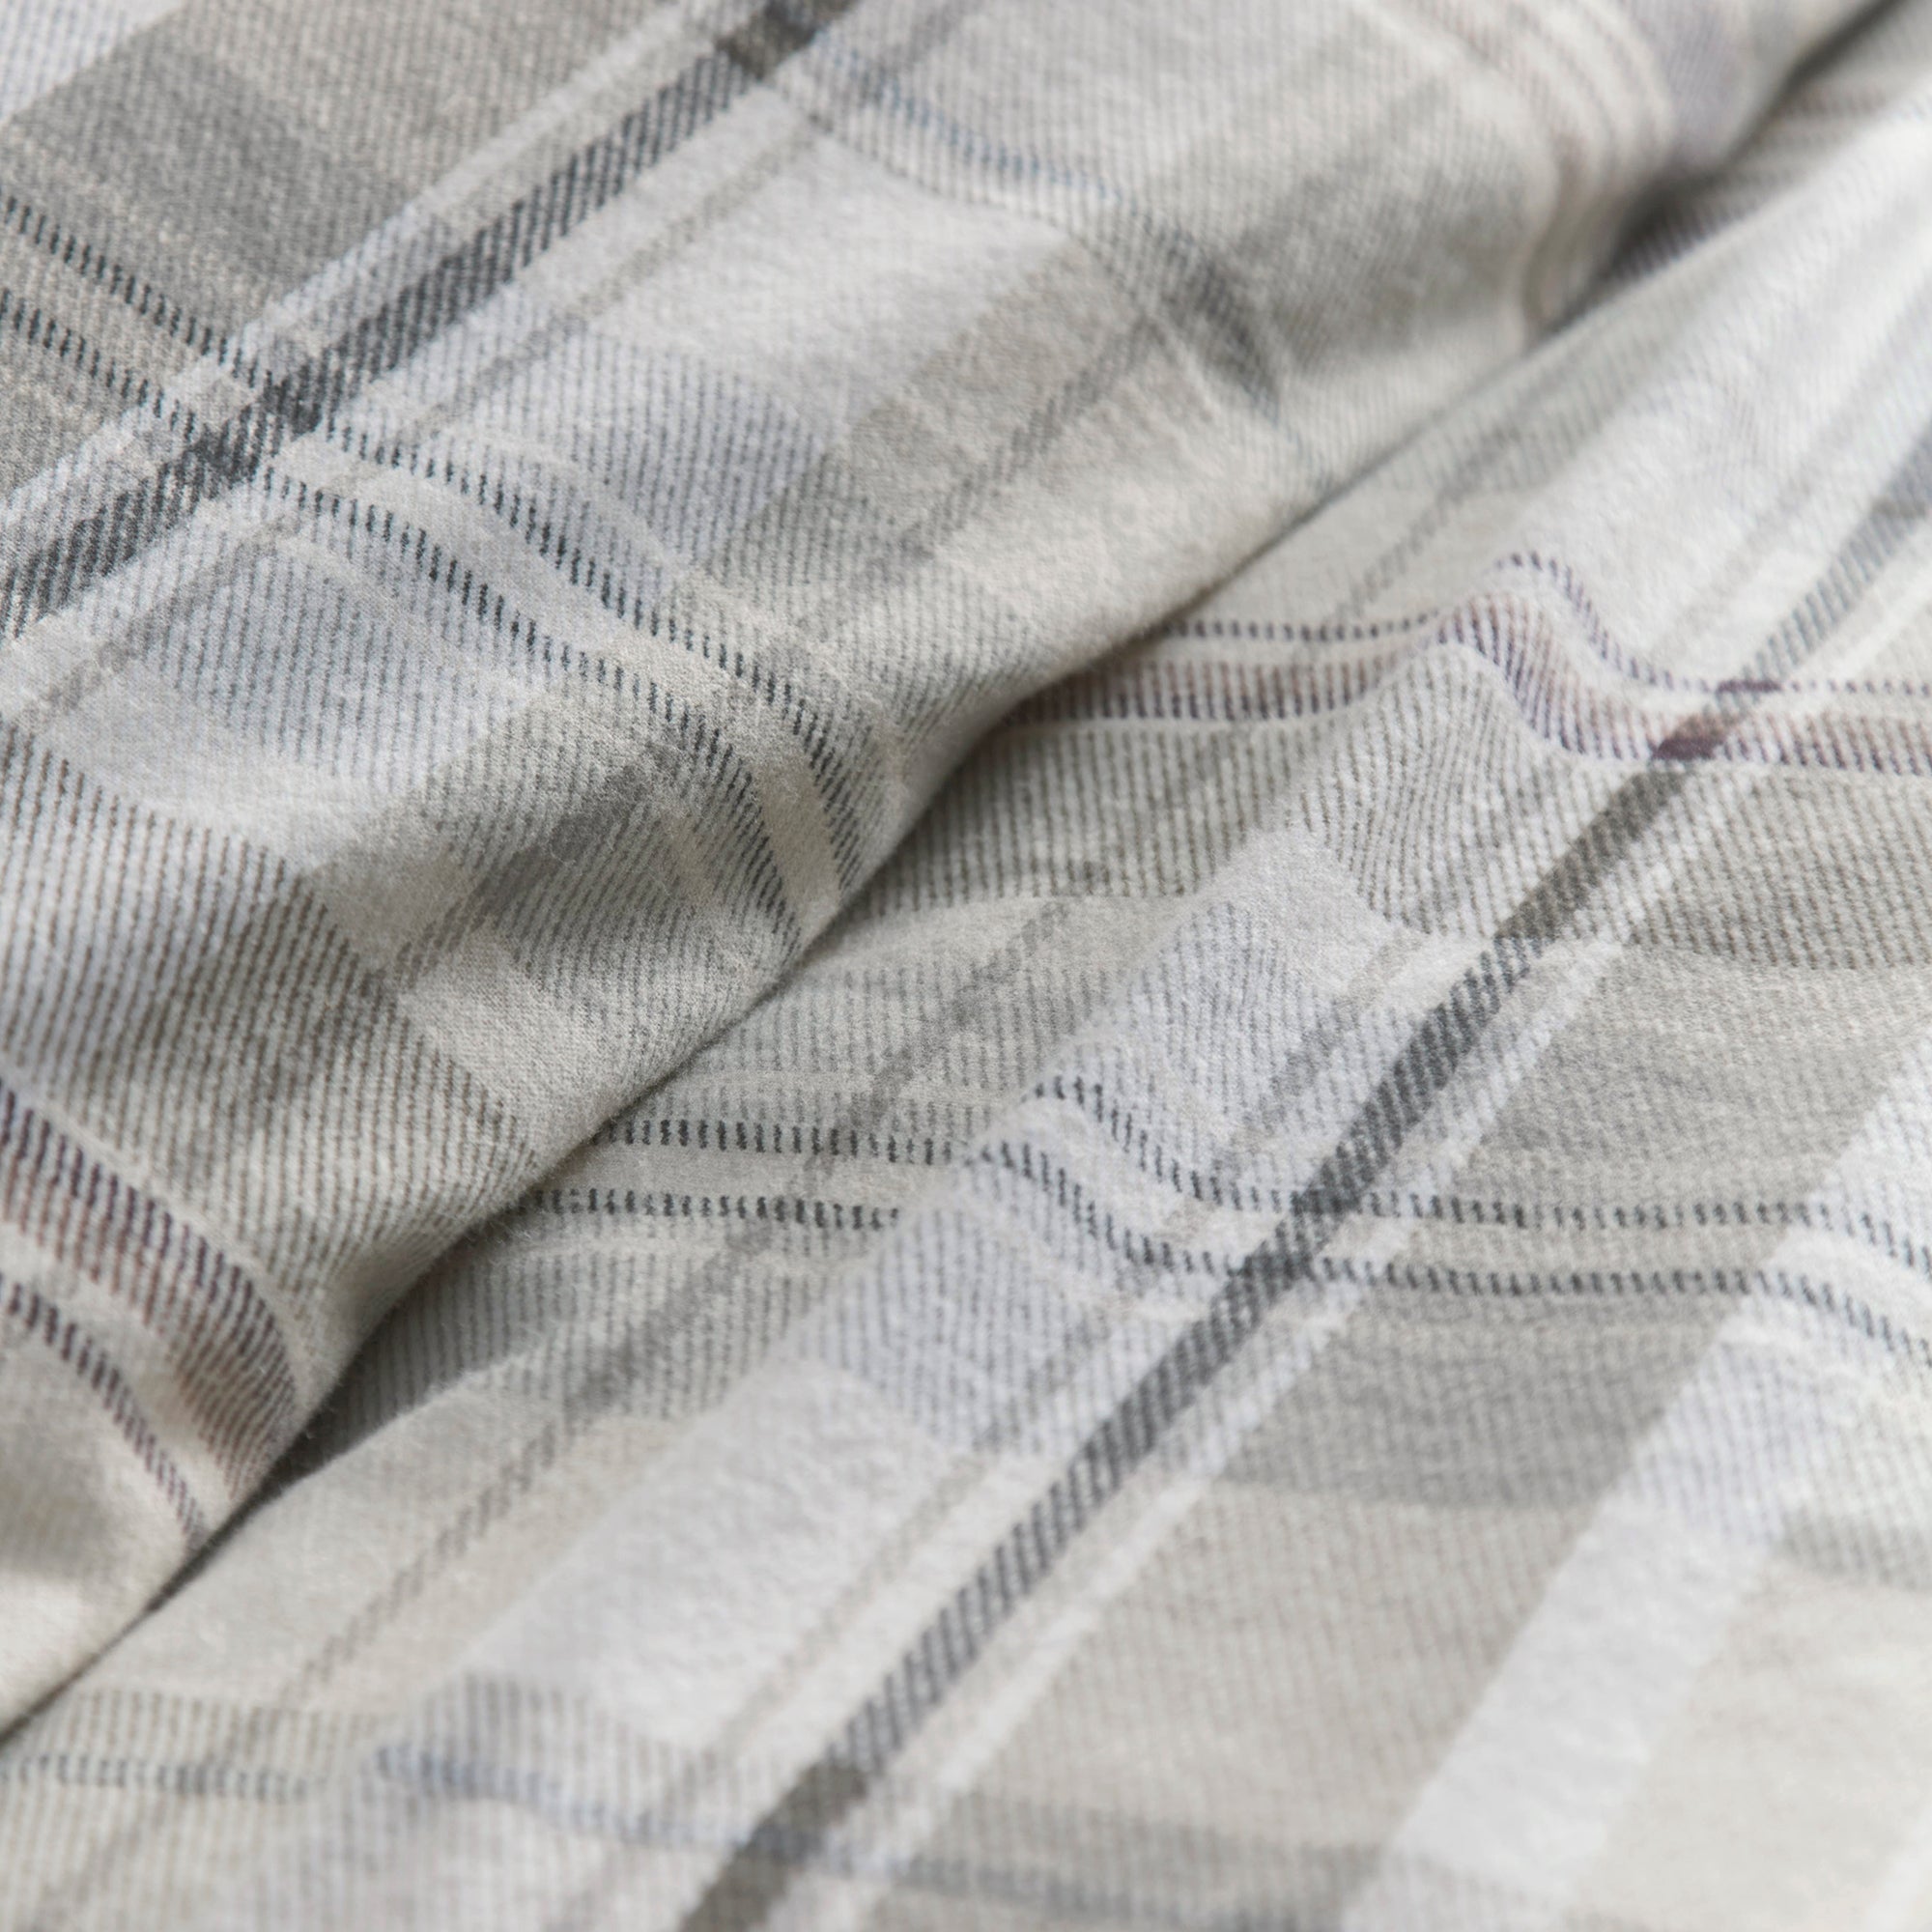 Applecross Check - 100% Cotton Duvet Cover Set in Natural - by Appletree Hygge